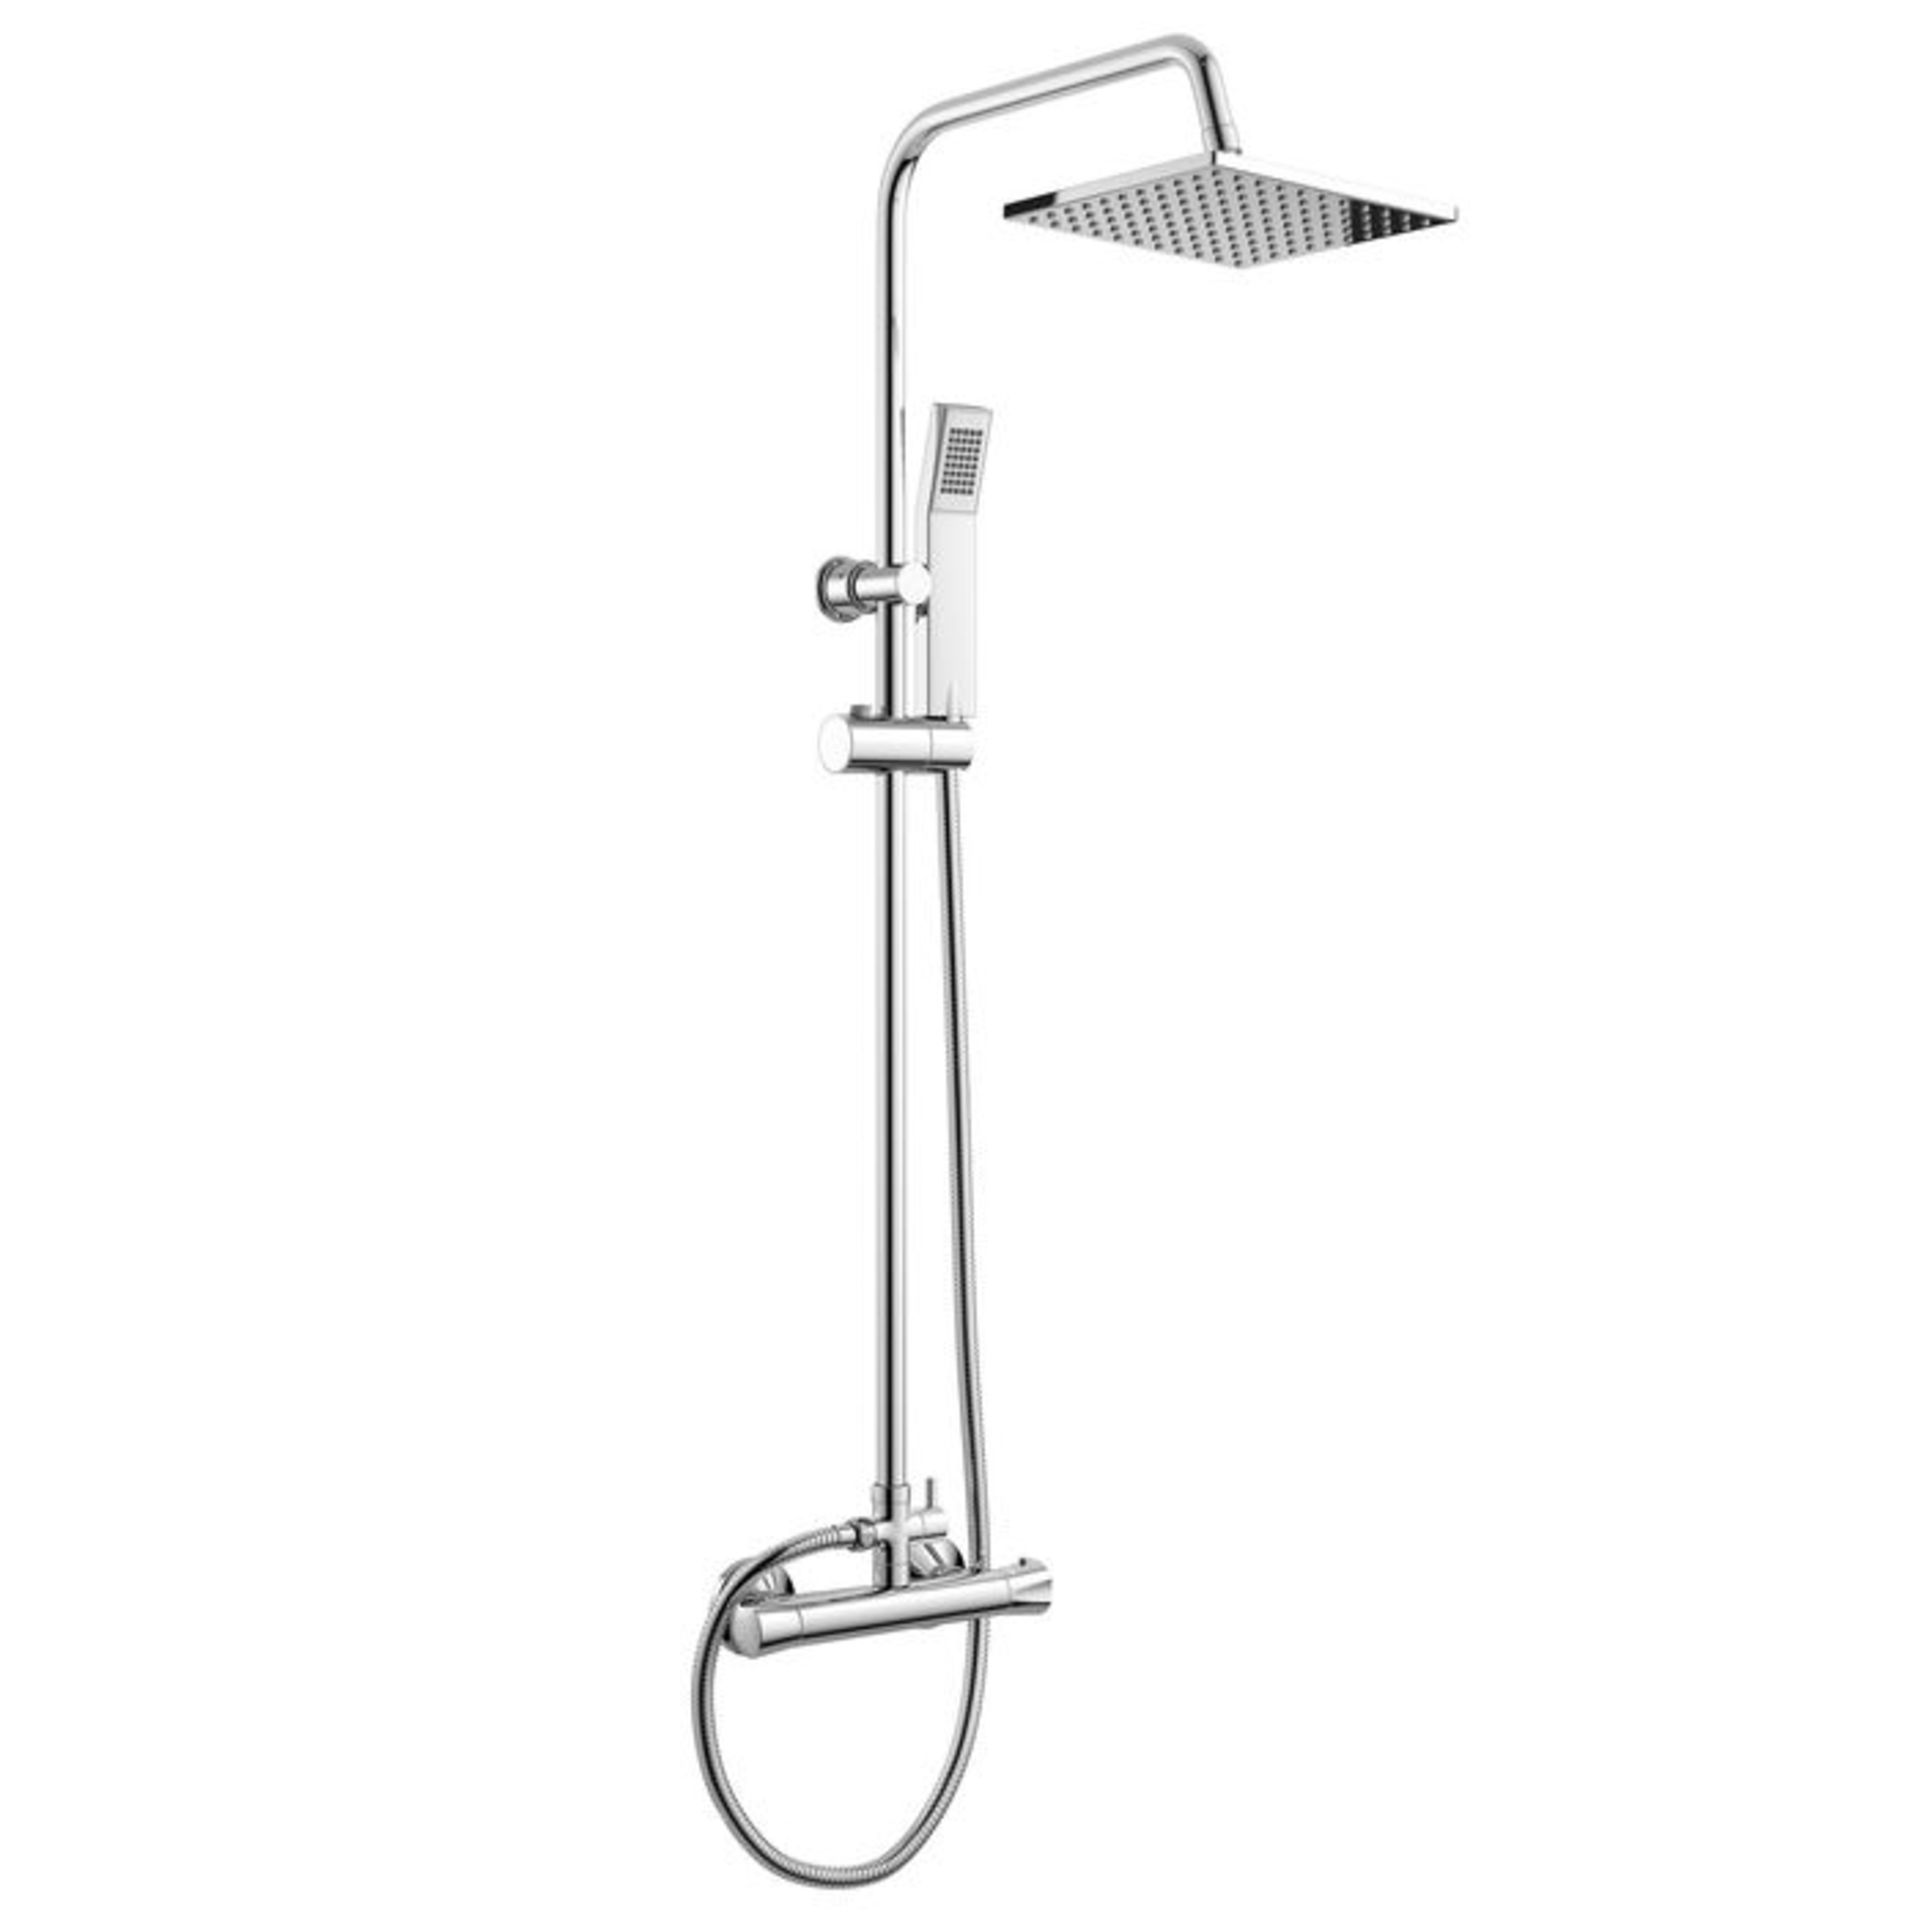 (AD84) Square Exposed Thermostatic Shower Kit & Head. Curved features and contemporary rounded